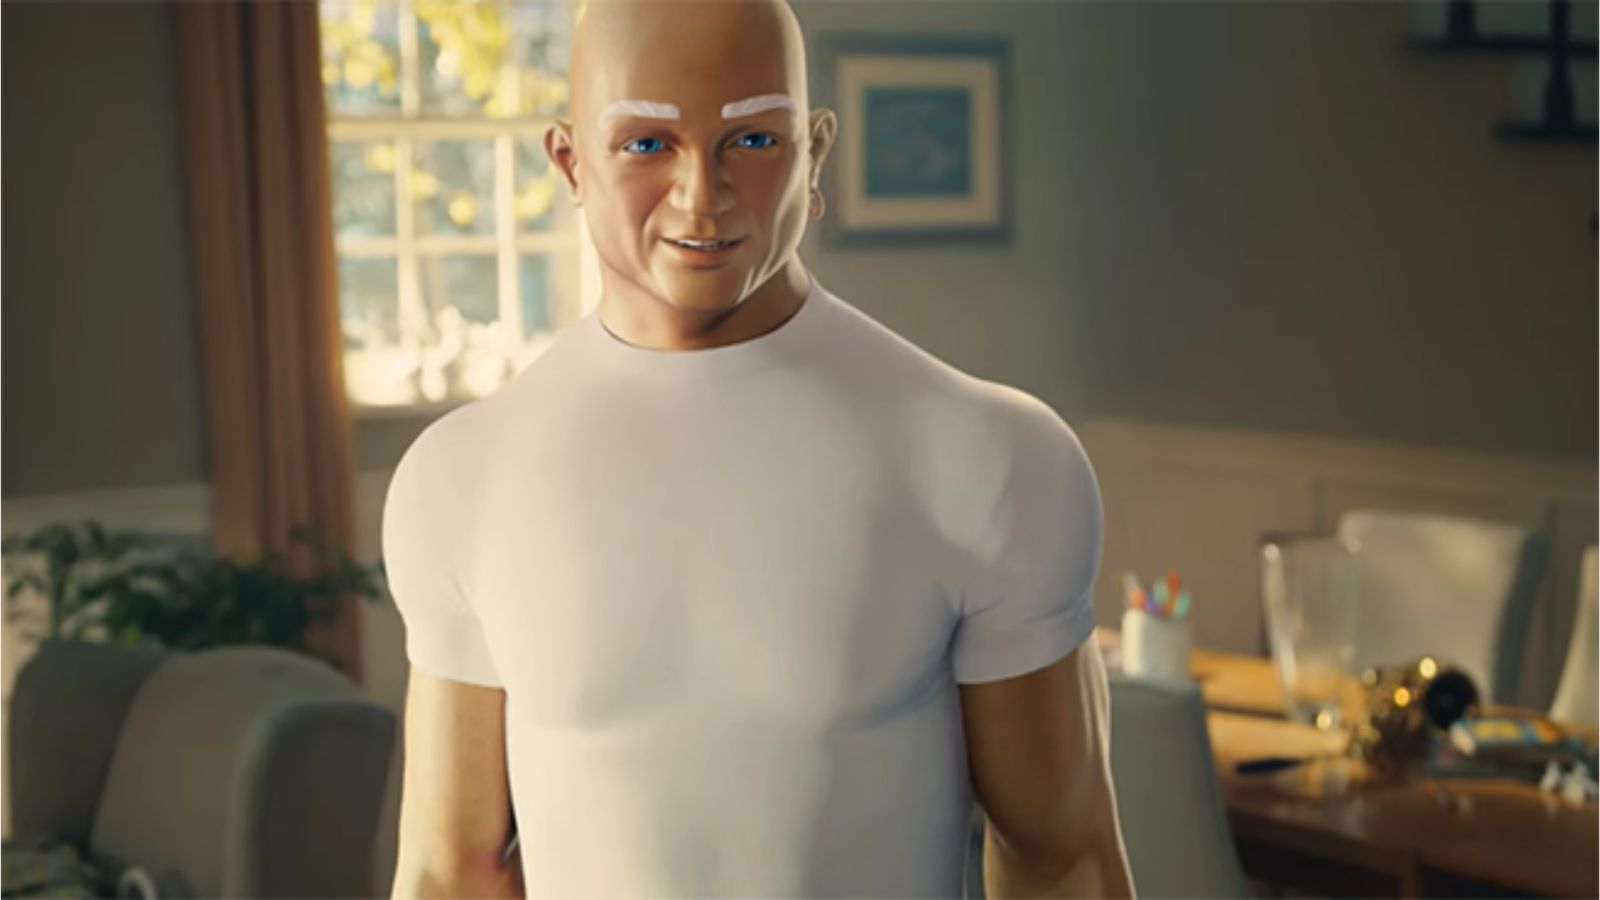 Who is Mr. Clean